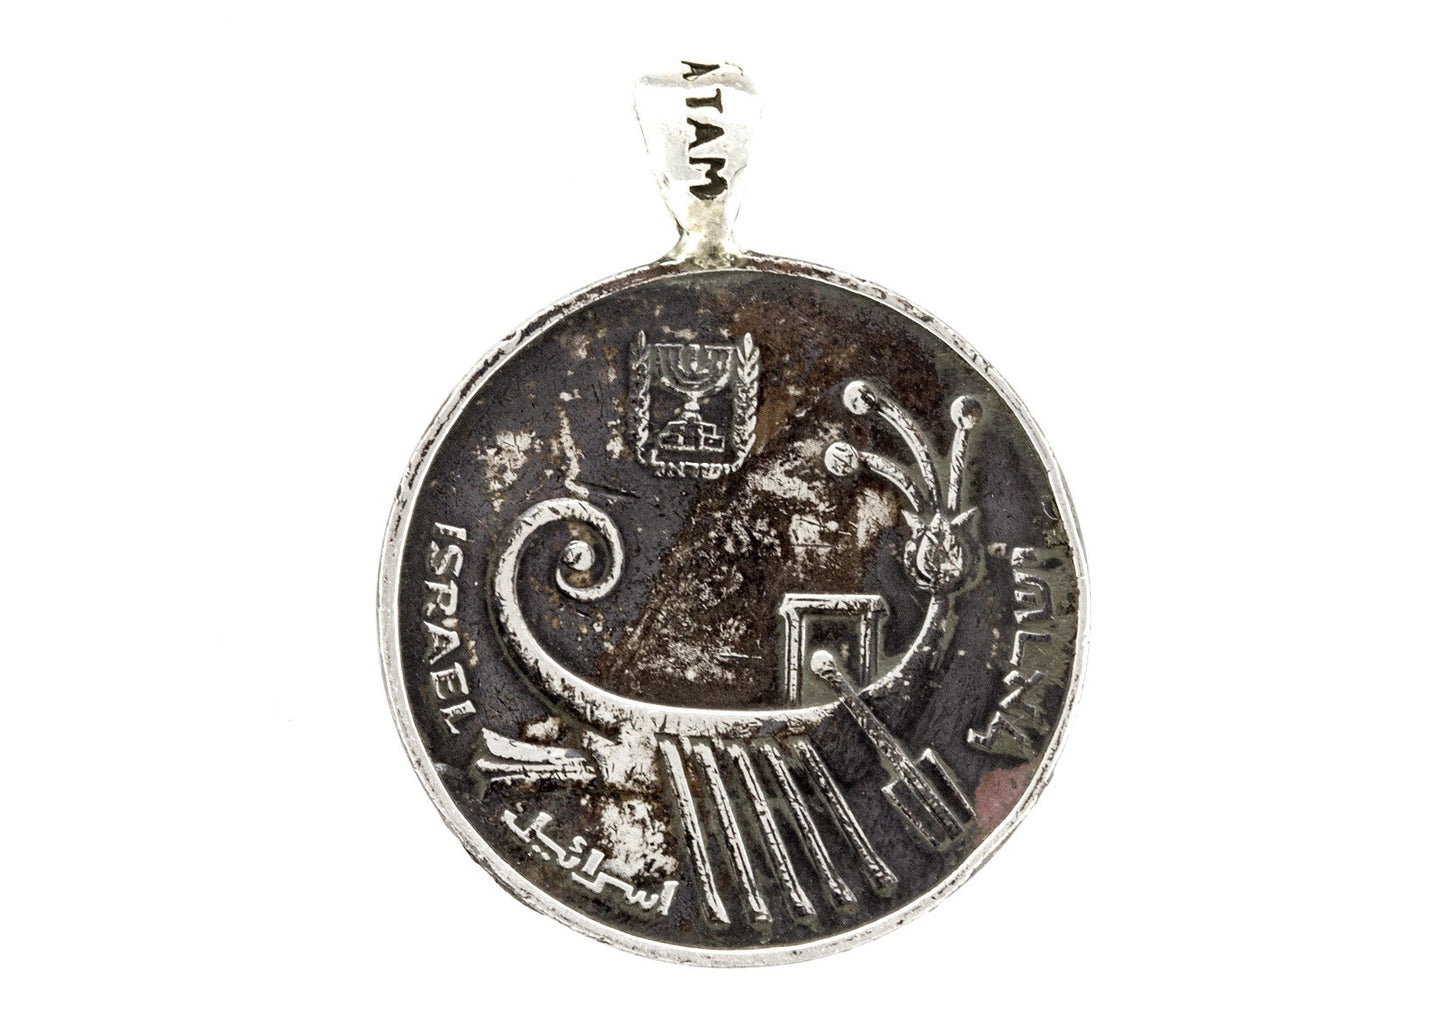 Pisces Sign Astrology Zodiac Medallion on Old 10 Sheqel Coin of Israel